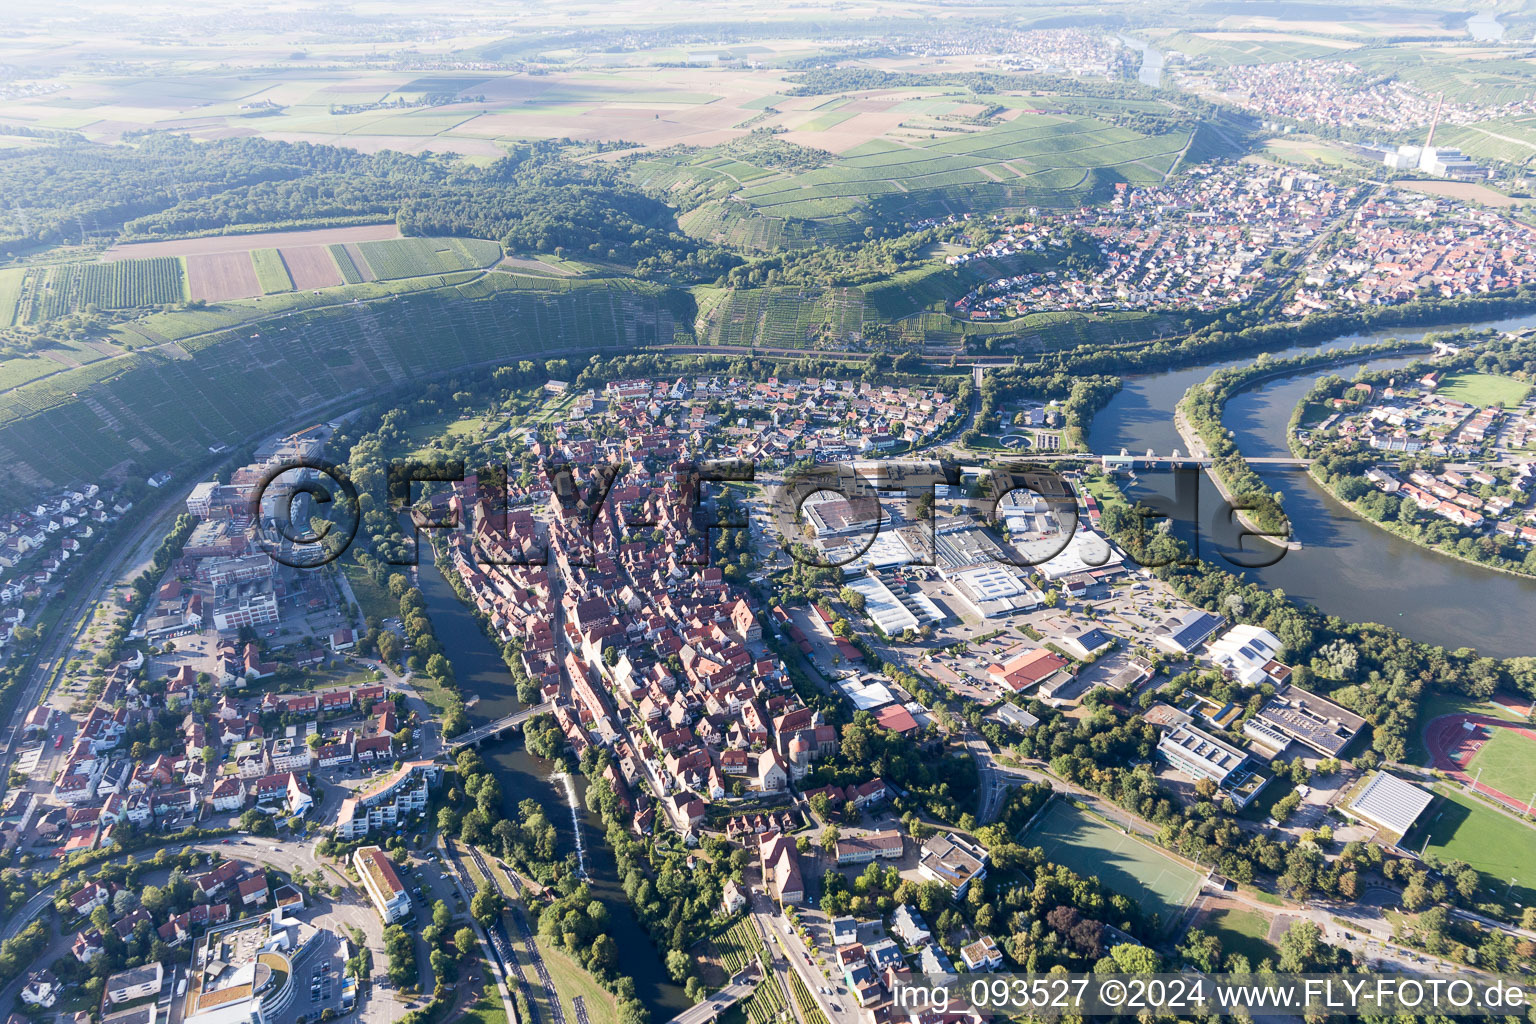 Besigheim in the state Baden-Wuerttemberg, Germany from the drone perspective